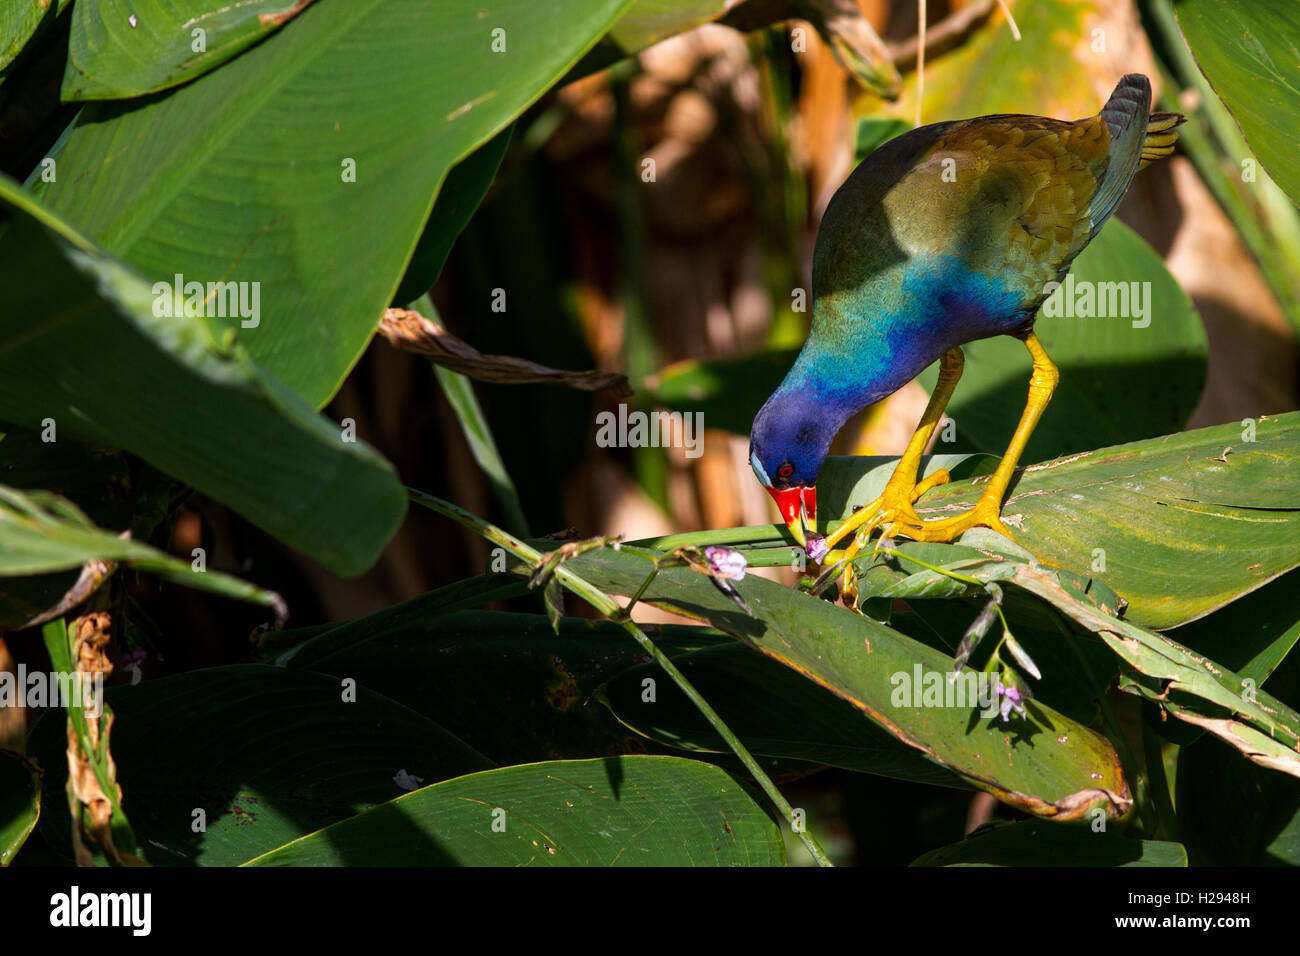 A purple gallinule,Porphyrio martinicus, nibbles on a favorite treat - flowers of the aquatic Fire Flag or Alligator flag plant. Stock Photo